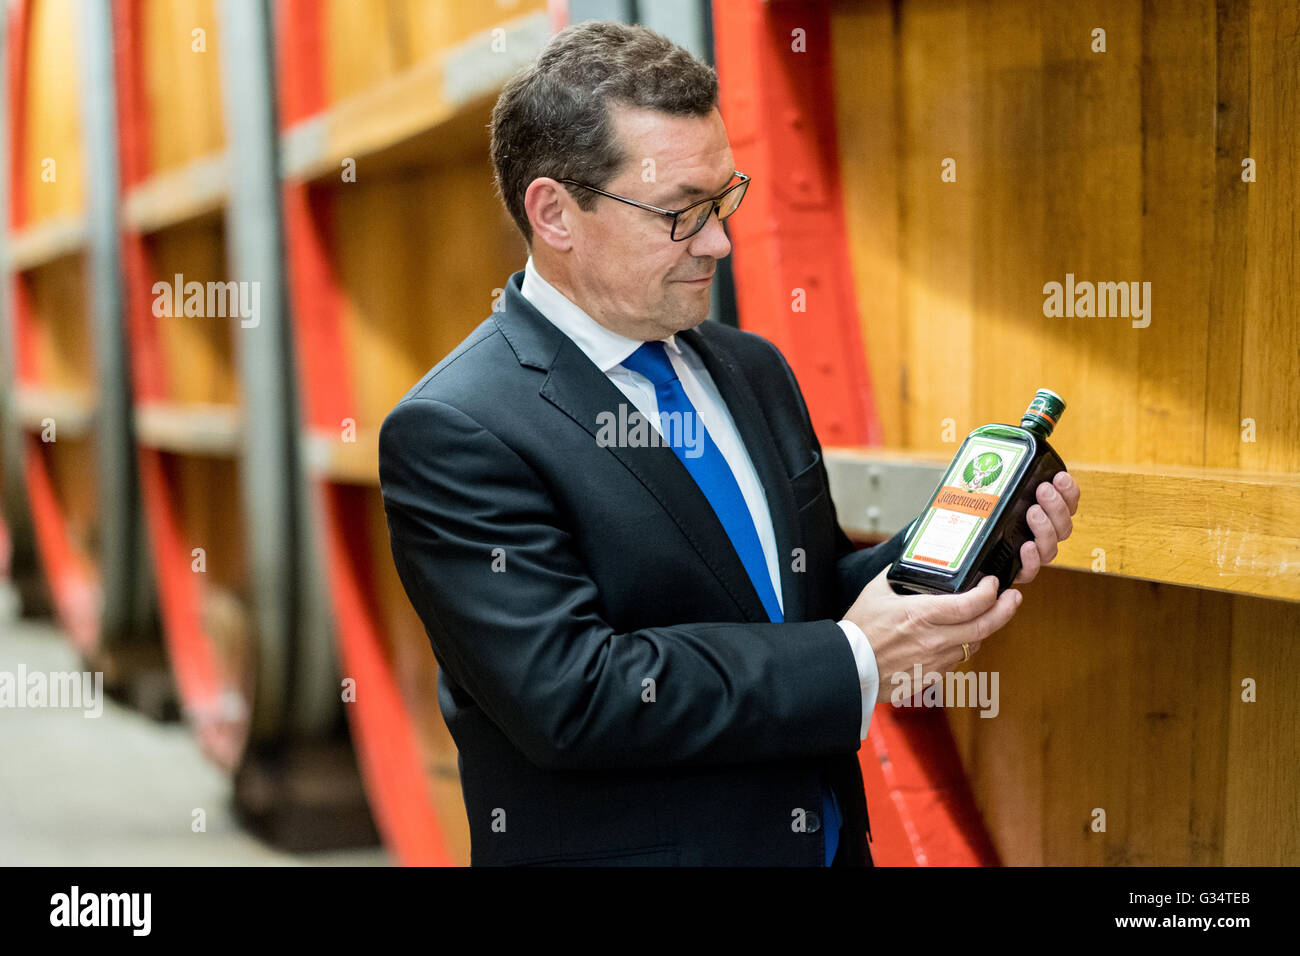 Wolfenbuettel, Germany. 07th June, 2016. Paolo Dell Antonio, spokesman of the Mast-Jaegermeister AG board, poses with a bottle of Jaegermeister at the corporate headquarters of the liquor company in Wolfenbuettel, Germany, 07 June 2016. Photo: PETER STEFFEN/dpa/Alamy Live News Stock Photo